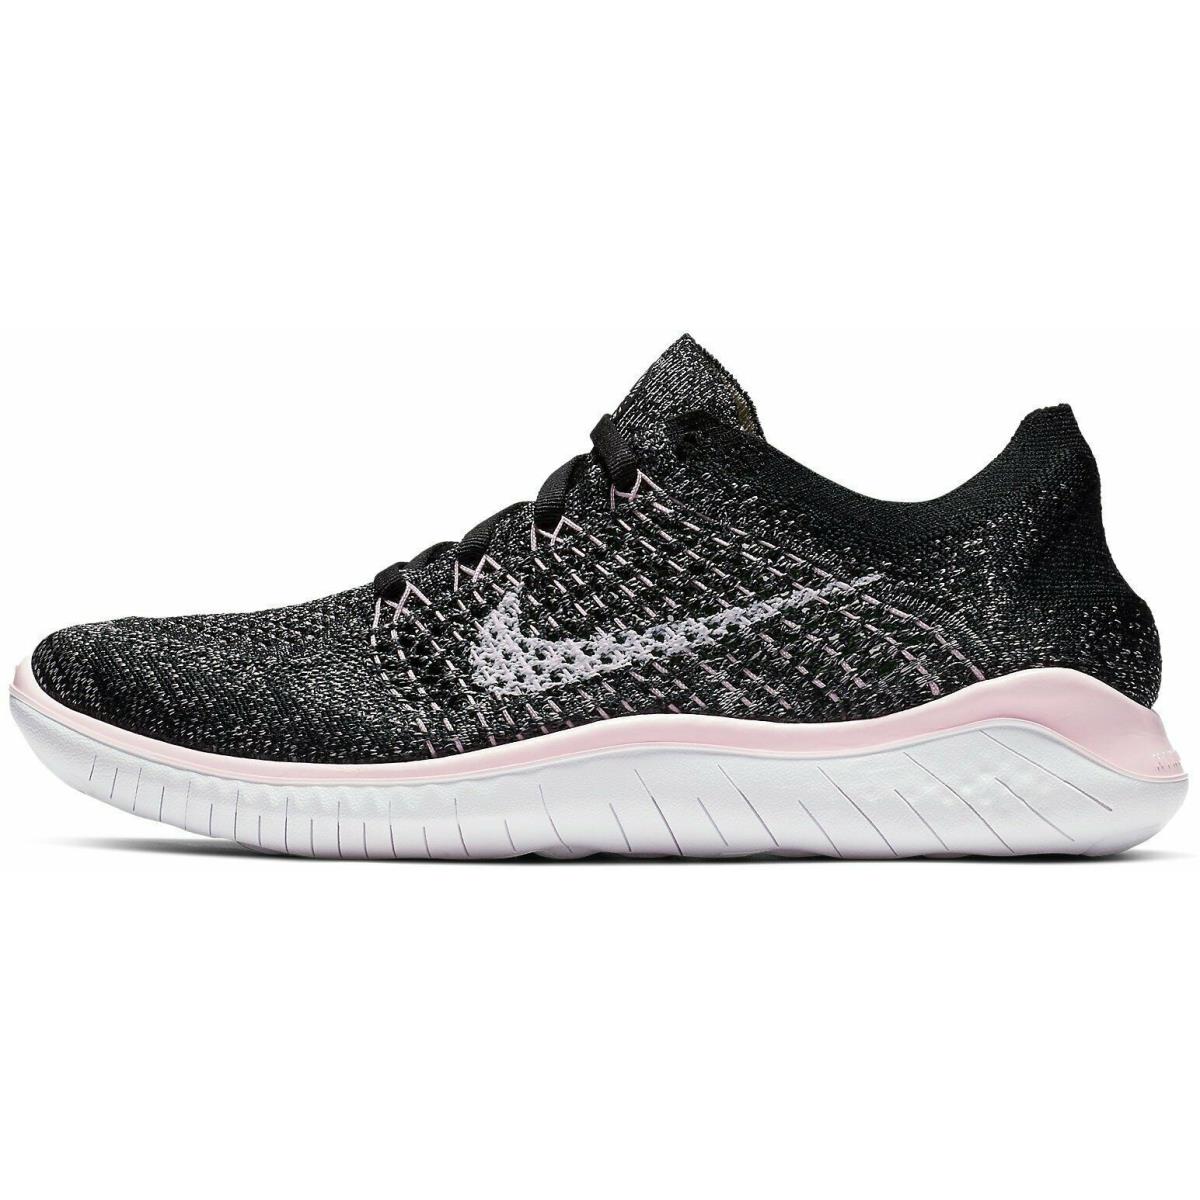 Womens Nike Free RN Flyknit 2018 Running Shoes -blk/pink 942839-007 -sz 6 -new